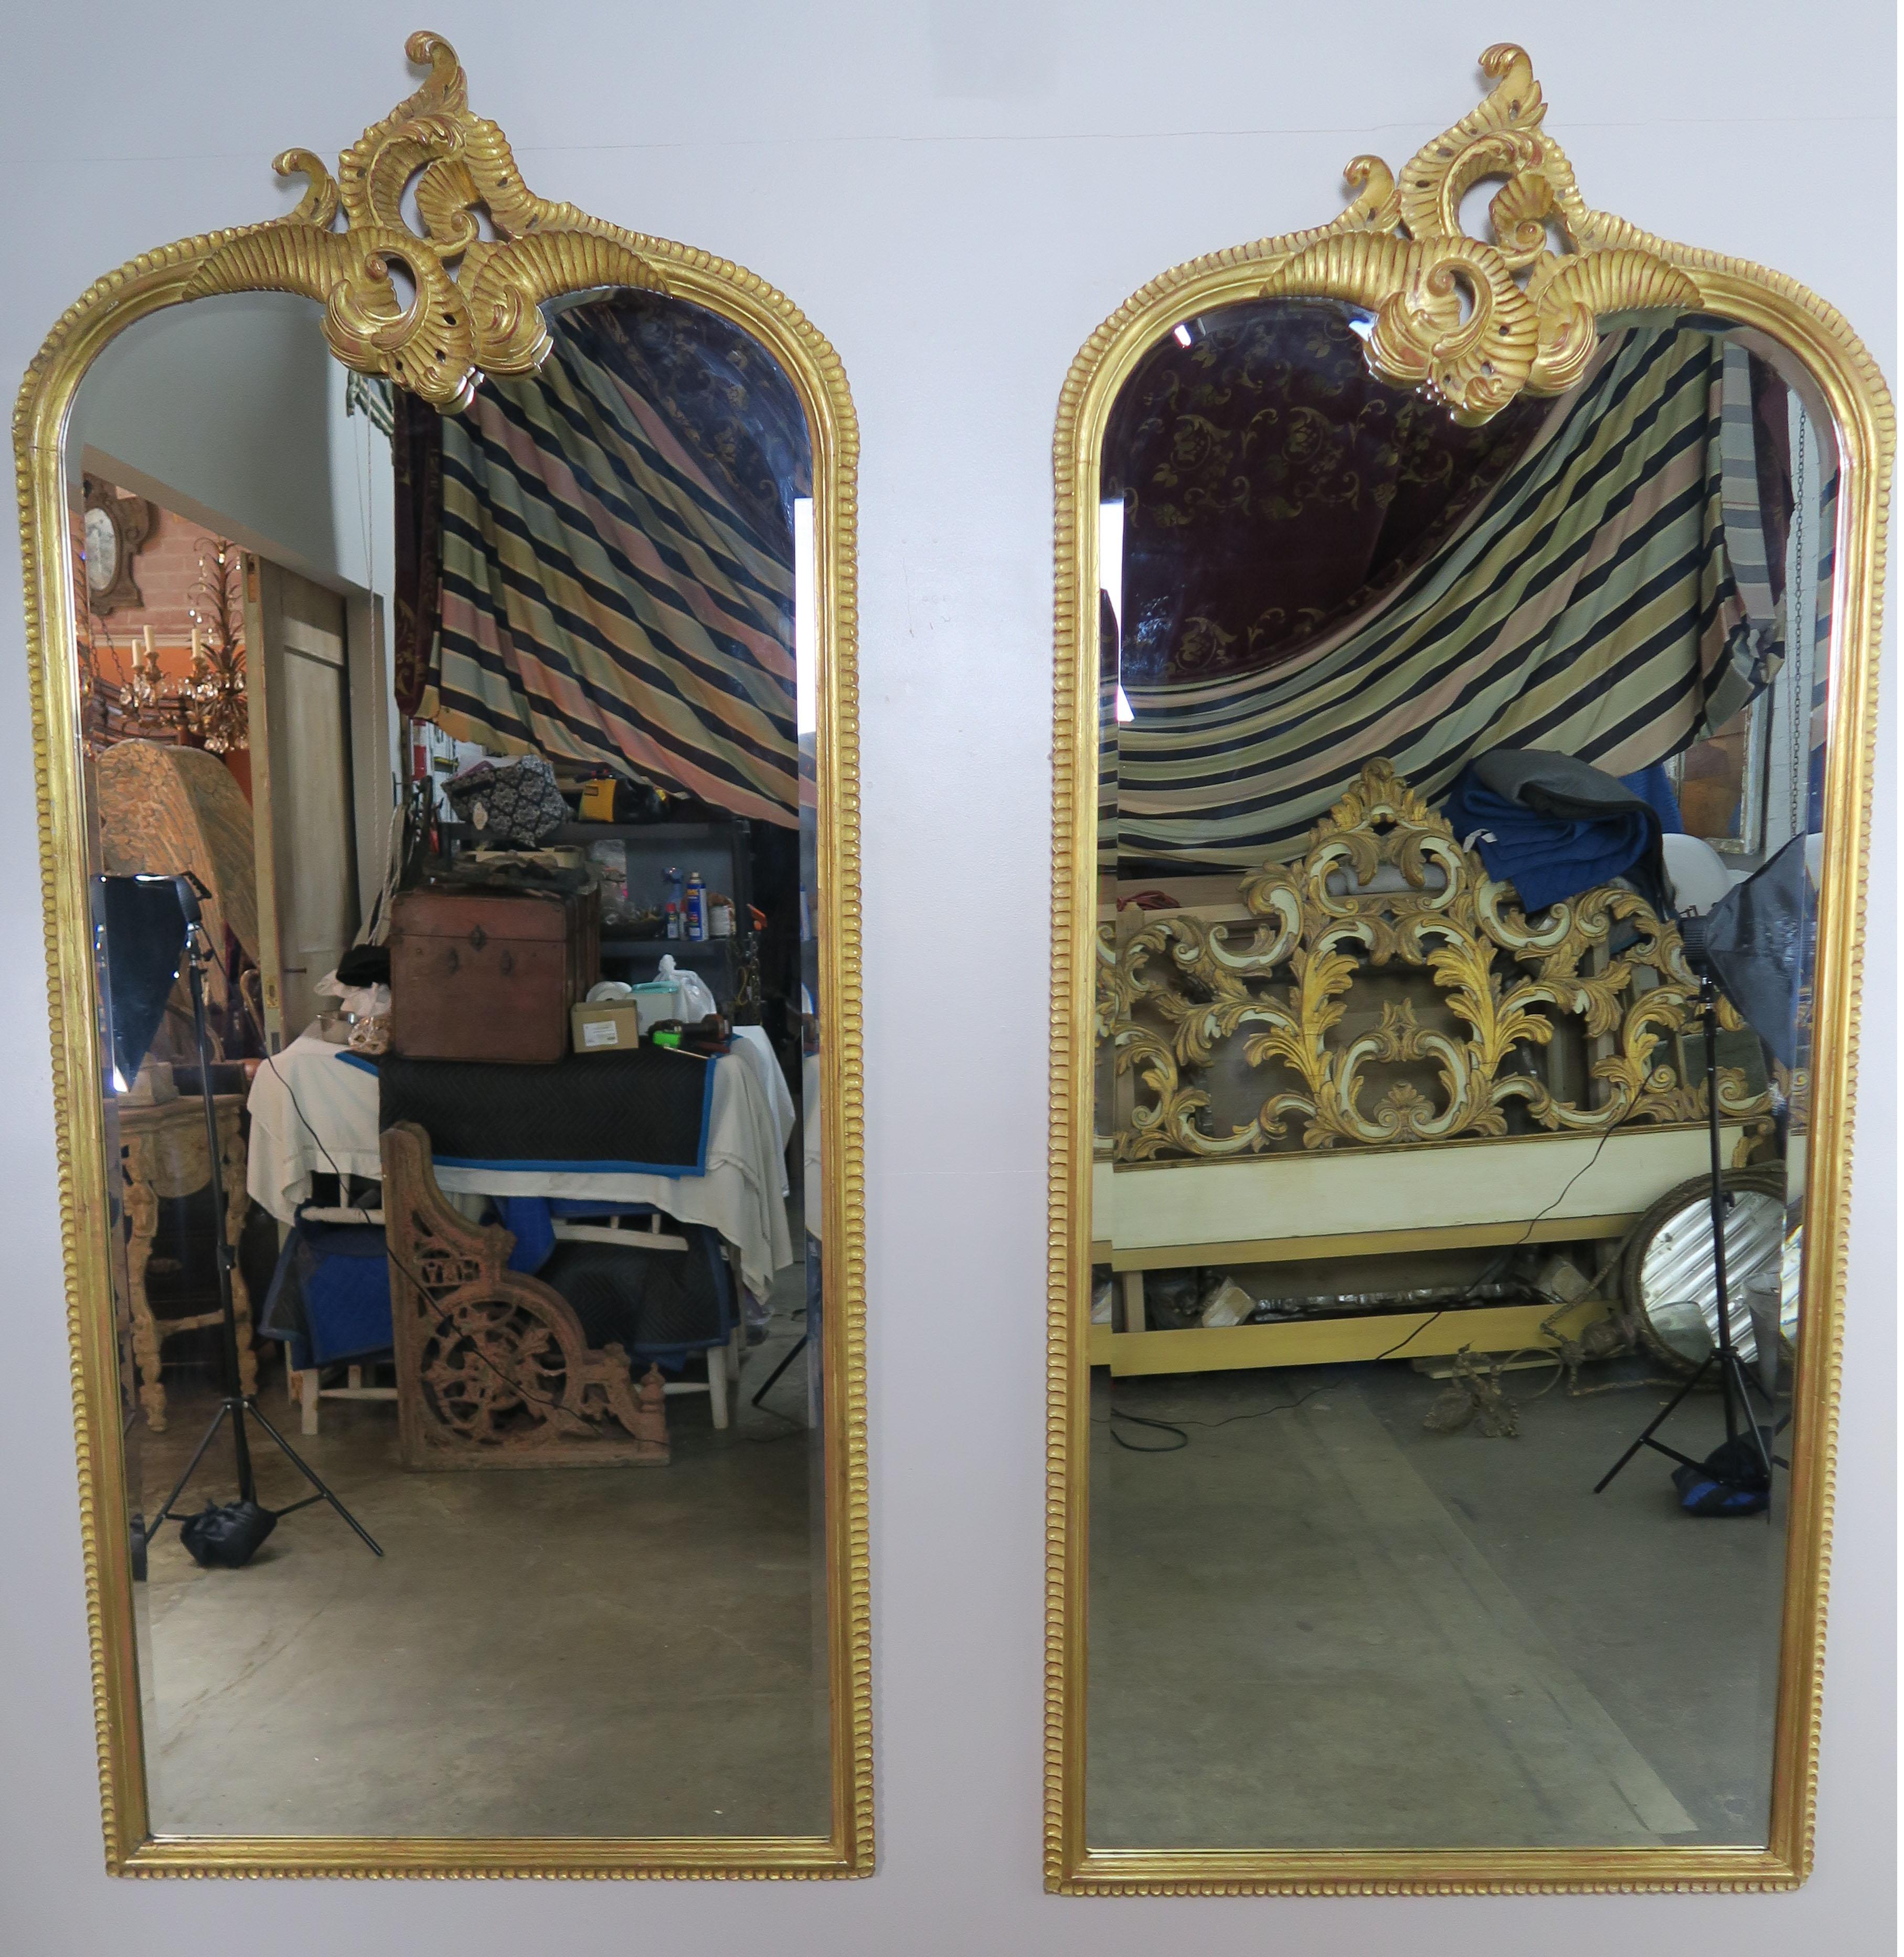 Pair of monumental mirrors carved from wood and finished in a 22-karat gold leaf finish. The mirror has beautiful carved scrolls at the tops of both mirrors with acanthus leaf details and carved detailing around the perimeter of the mirror.
1